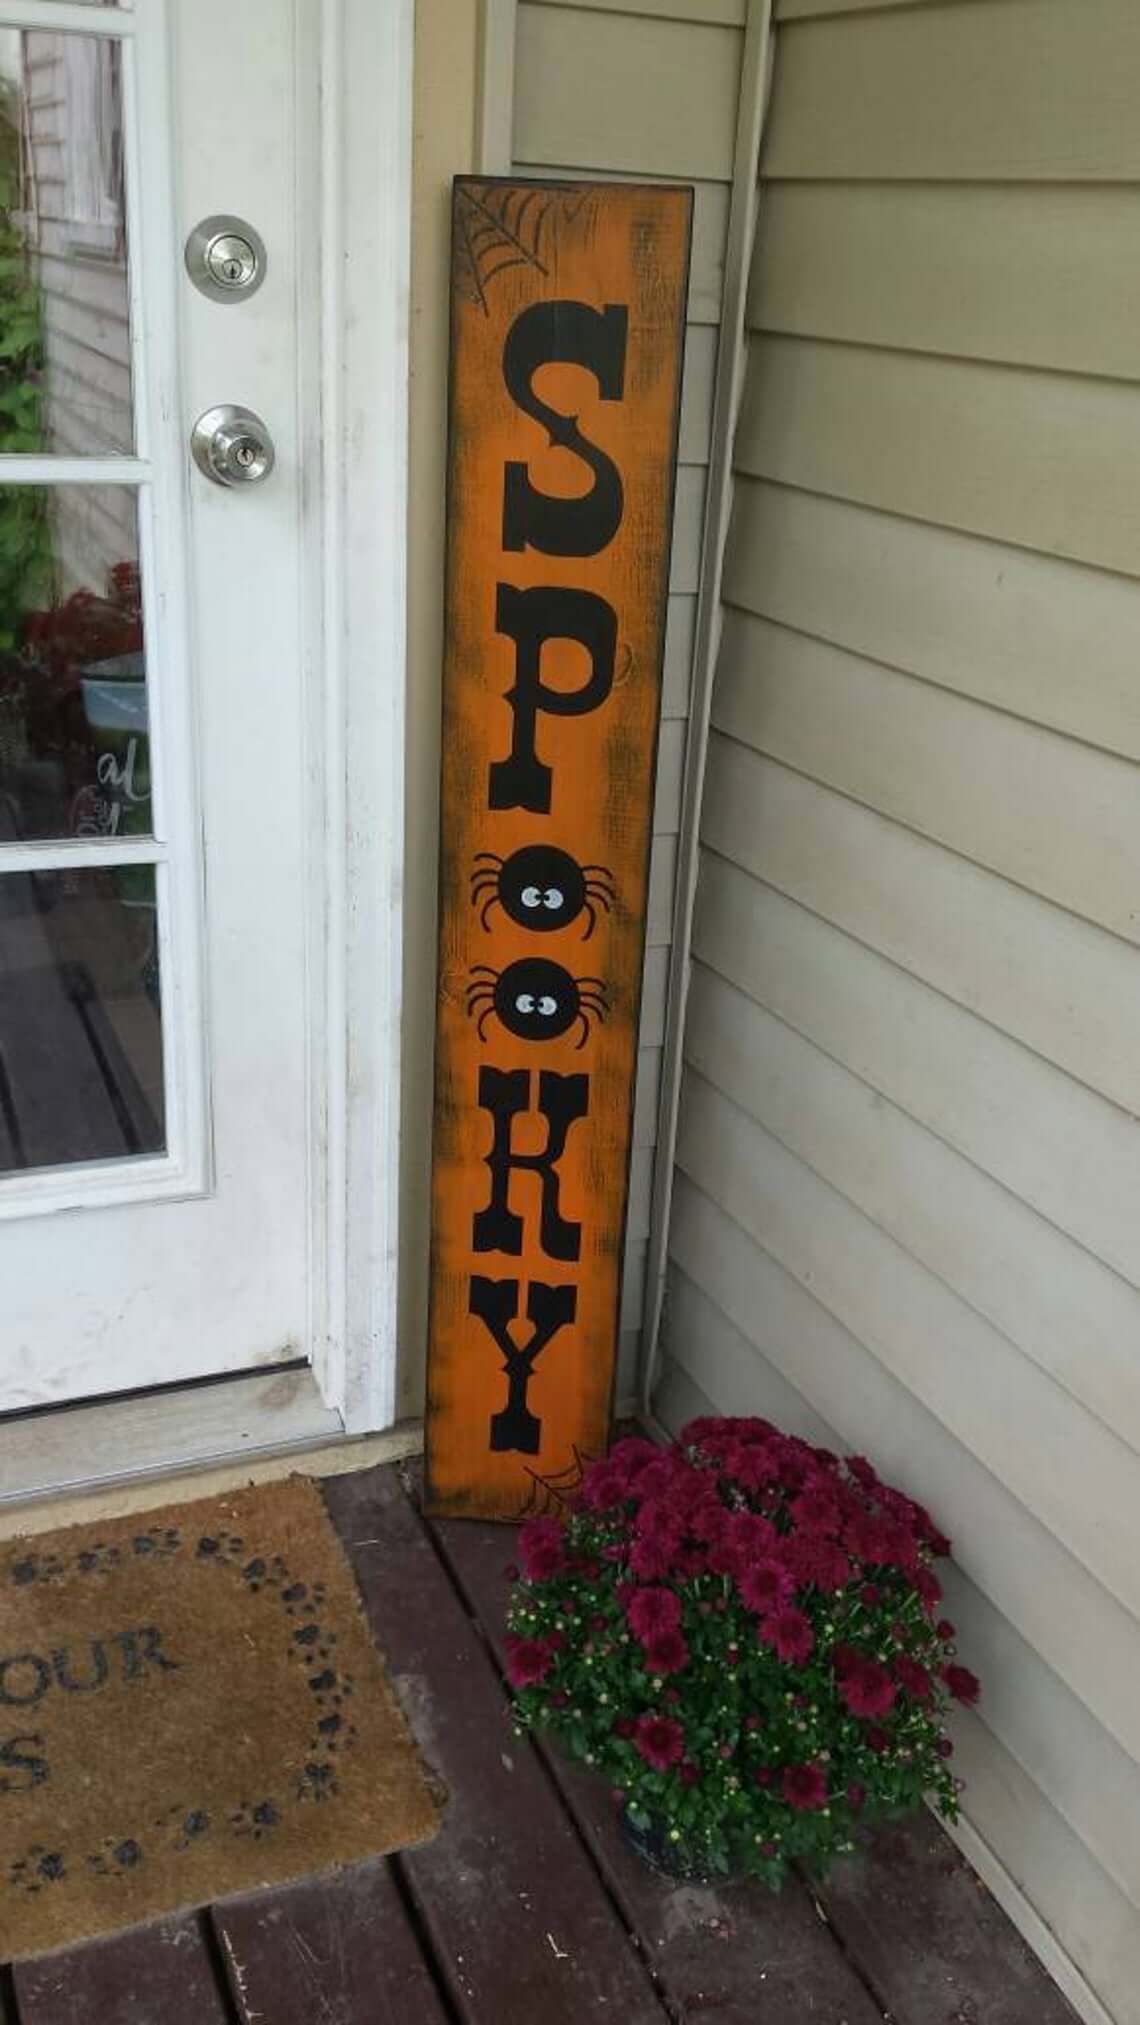 It's a Spooky Halloween Entryway Sign